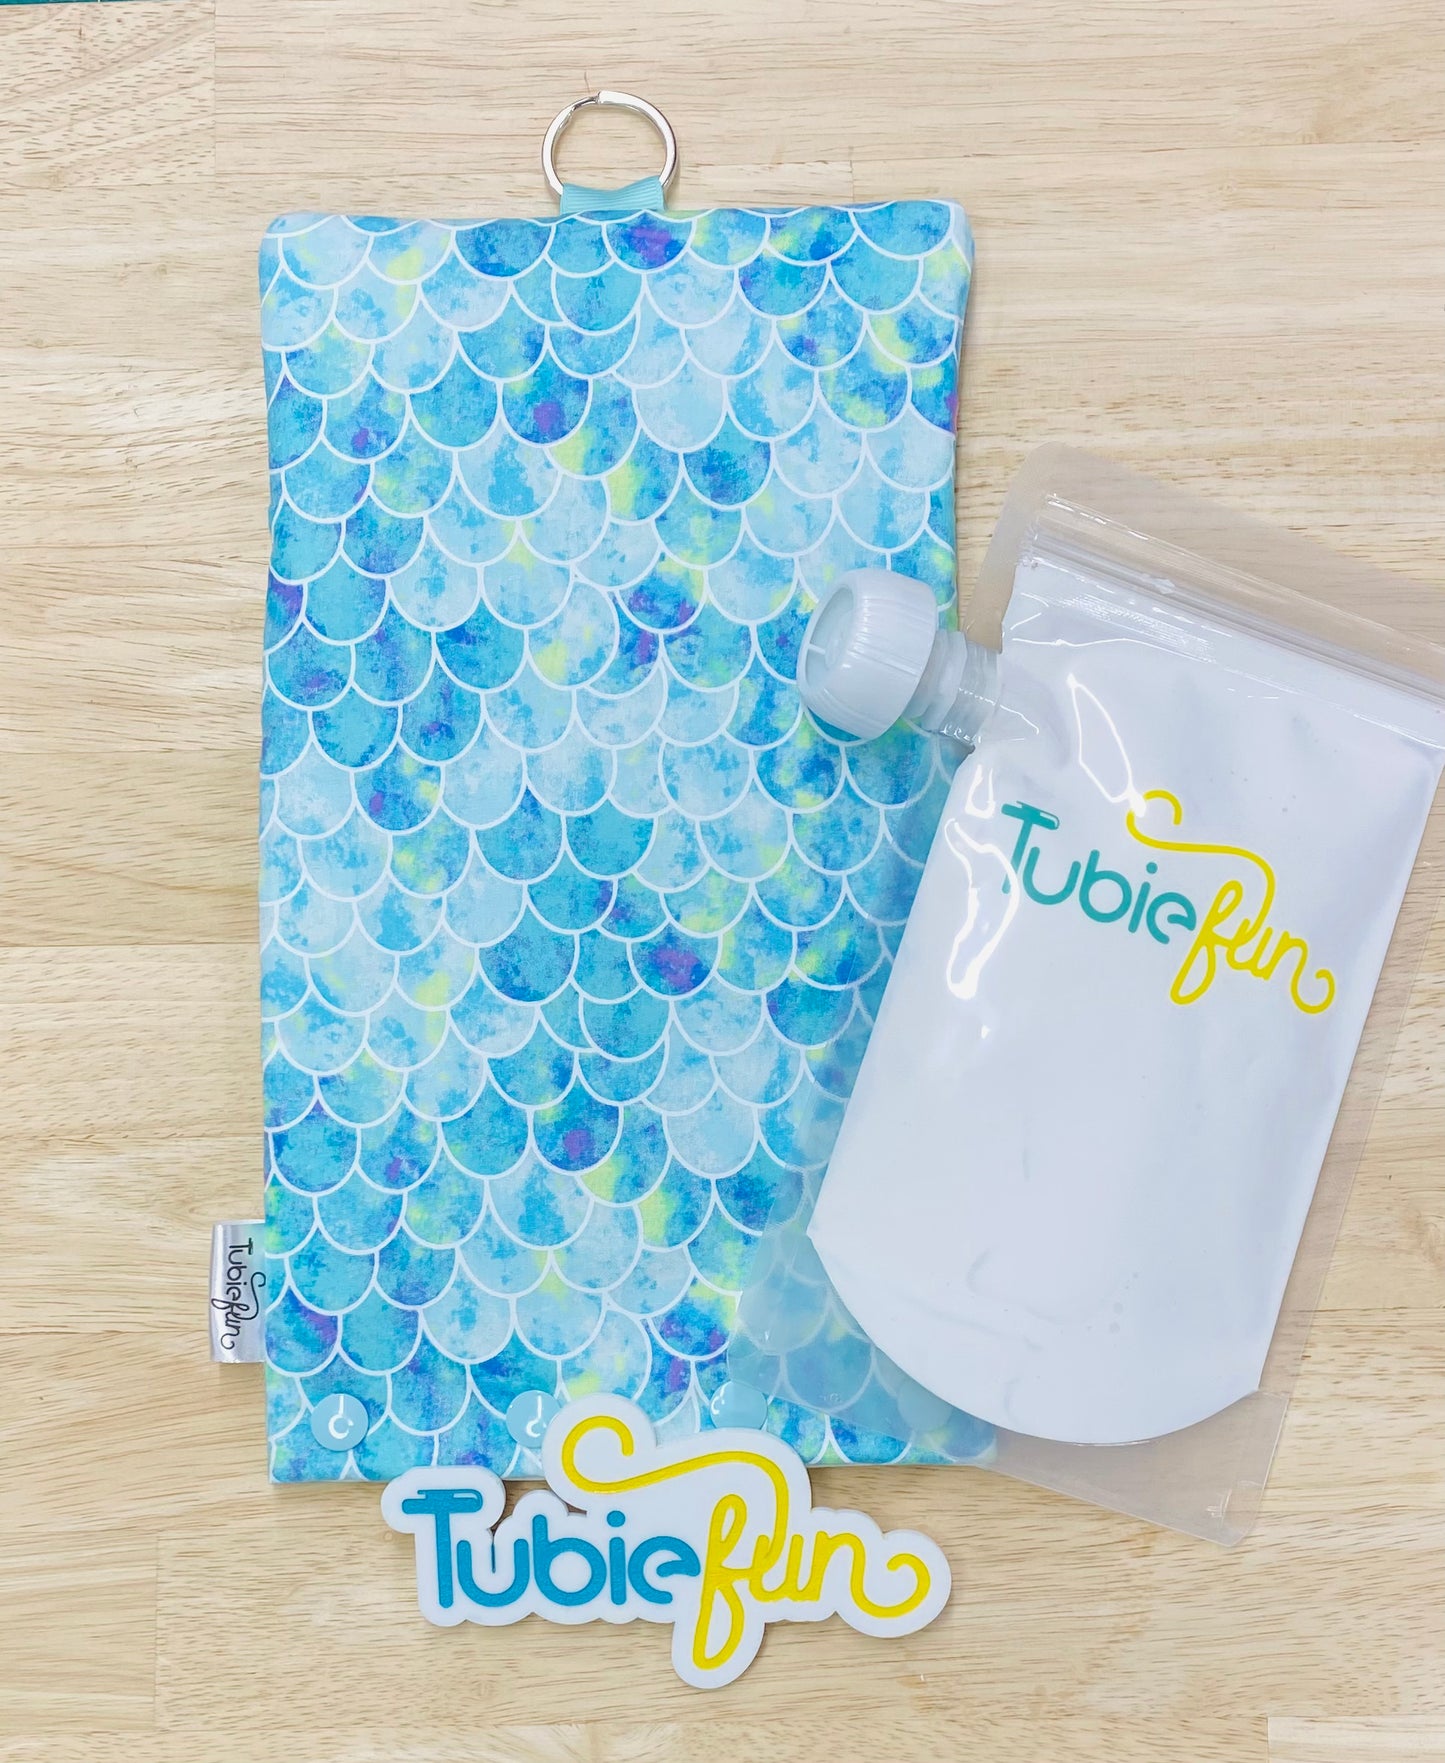 NEW Insulated Milk Bag Suitable for Tubie Fun 500ml Reusable Pouches - Blue Mermaid Scales